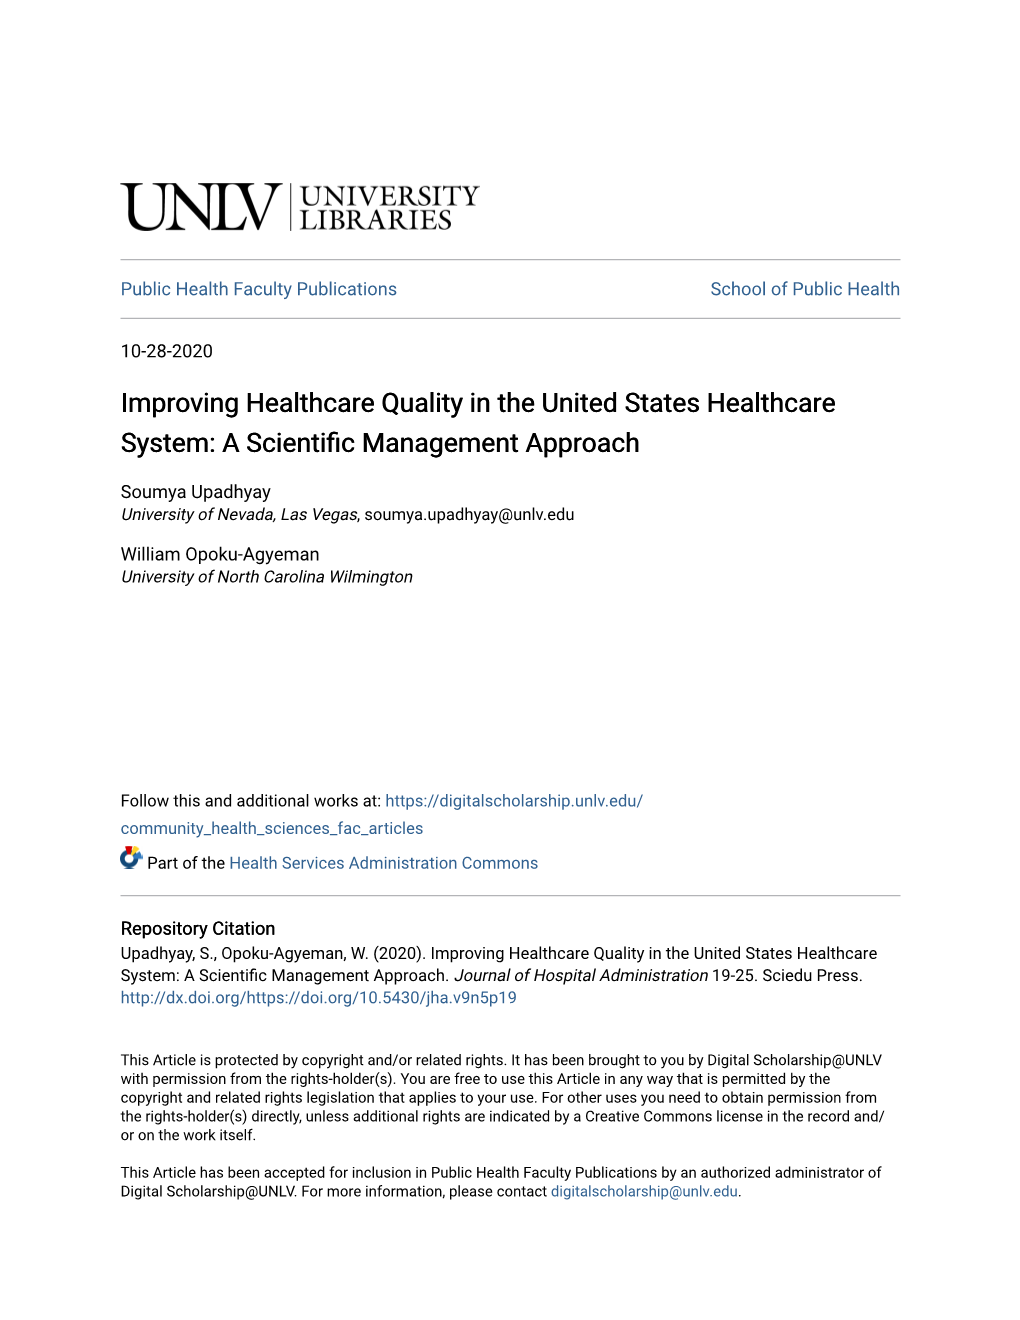 Improving Healthcare Quality in the United States Healthcare System: a Scientific Management Approach